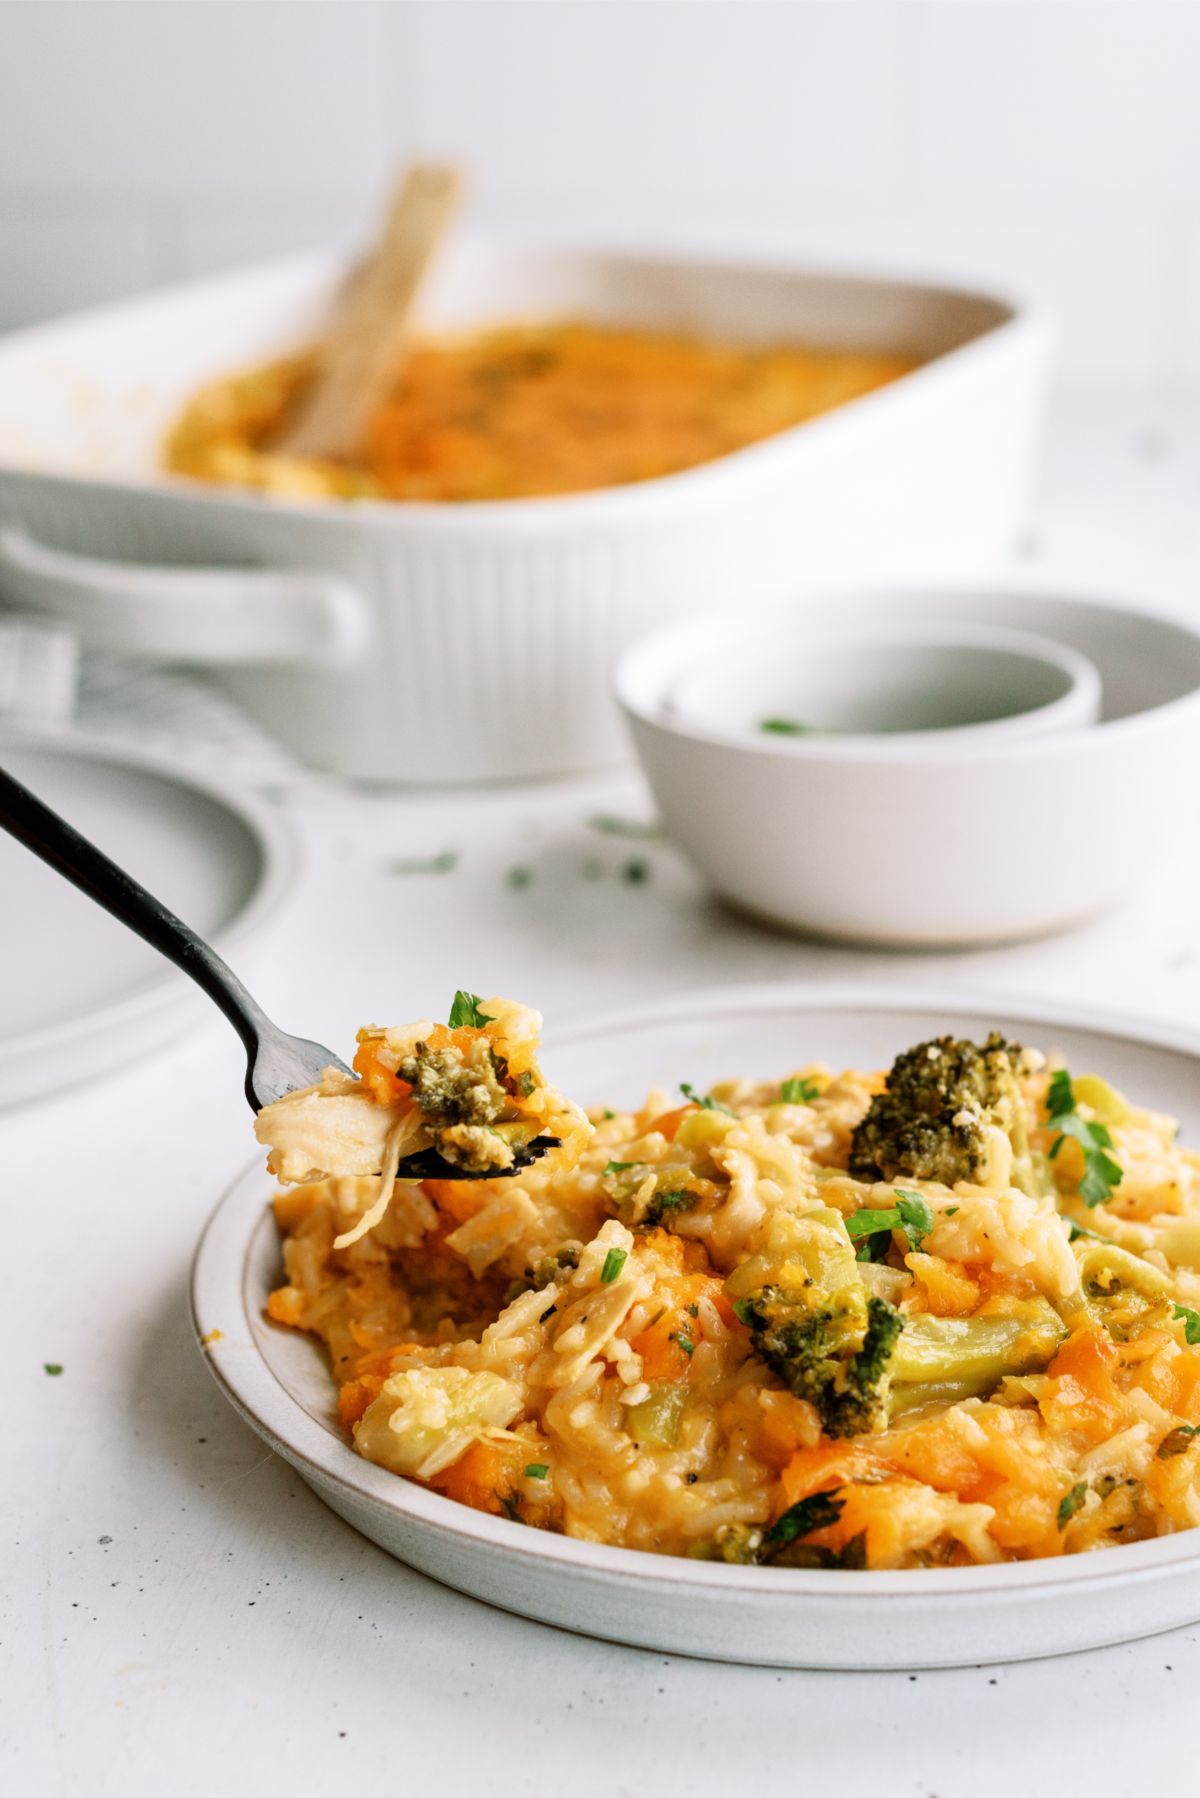 A serving of Cheesy Chicken Broccoli Rice Casserole Recipe (No Soup) on a  plate with a fork